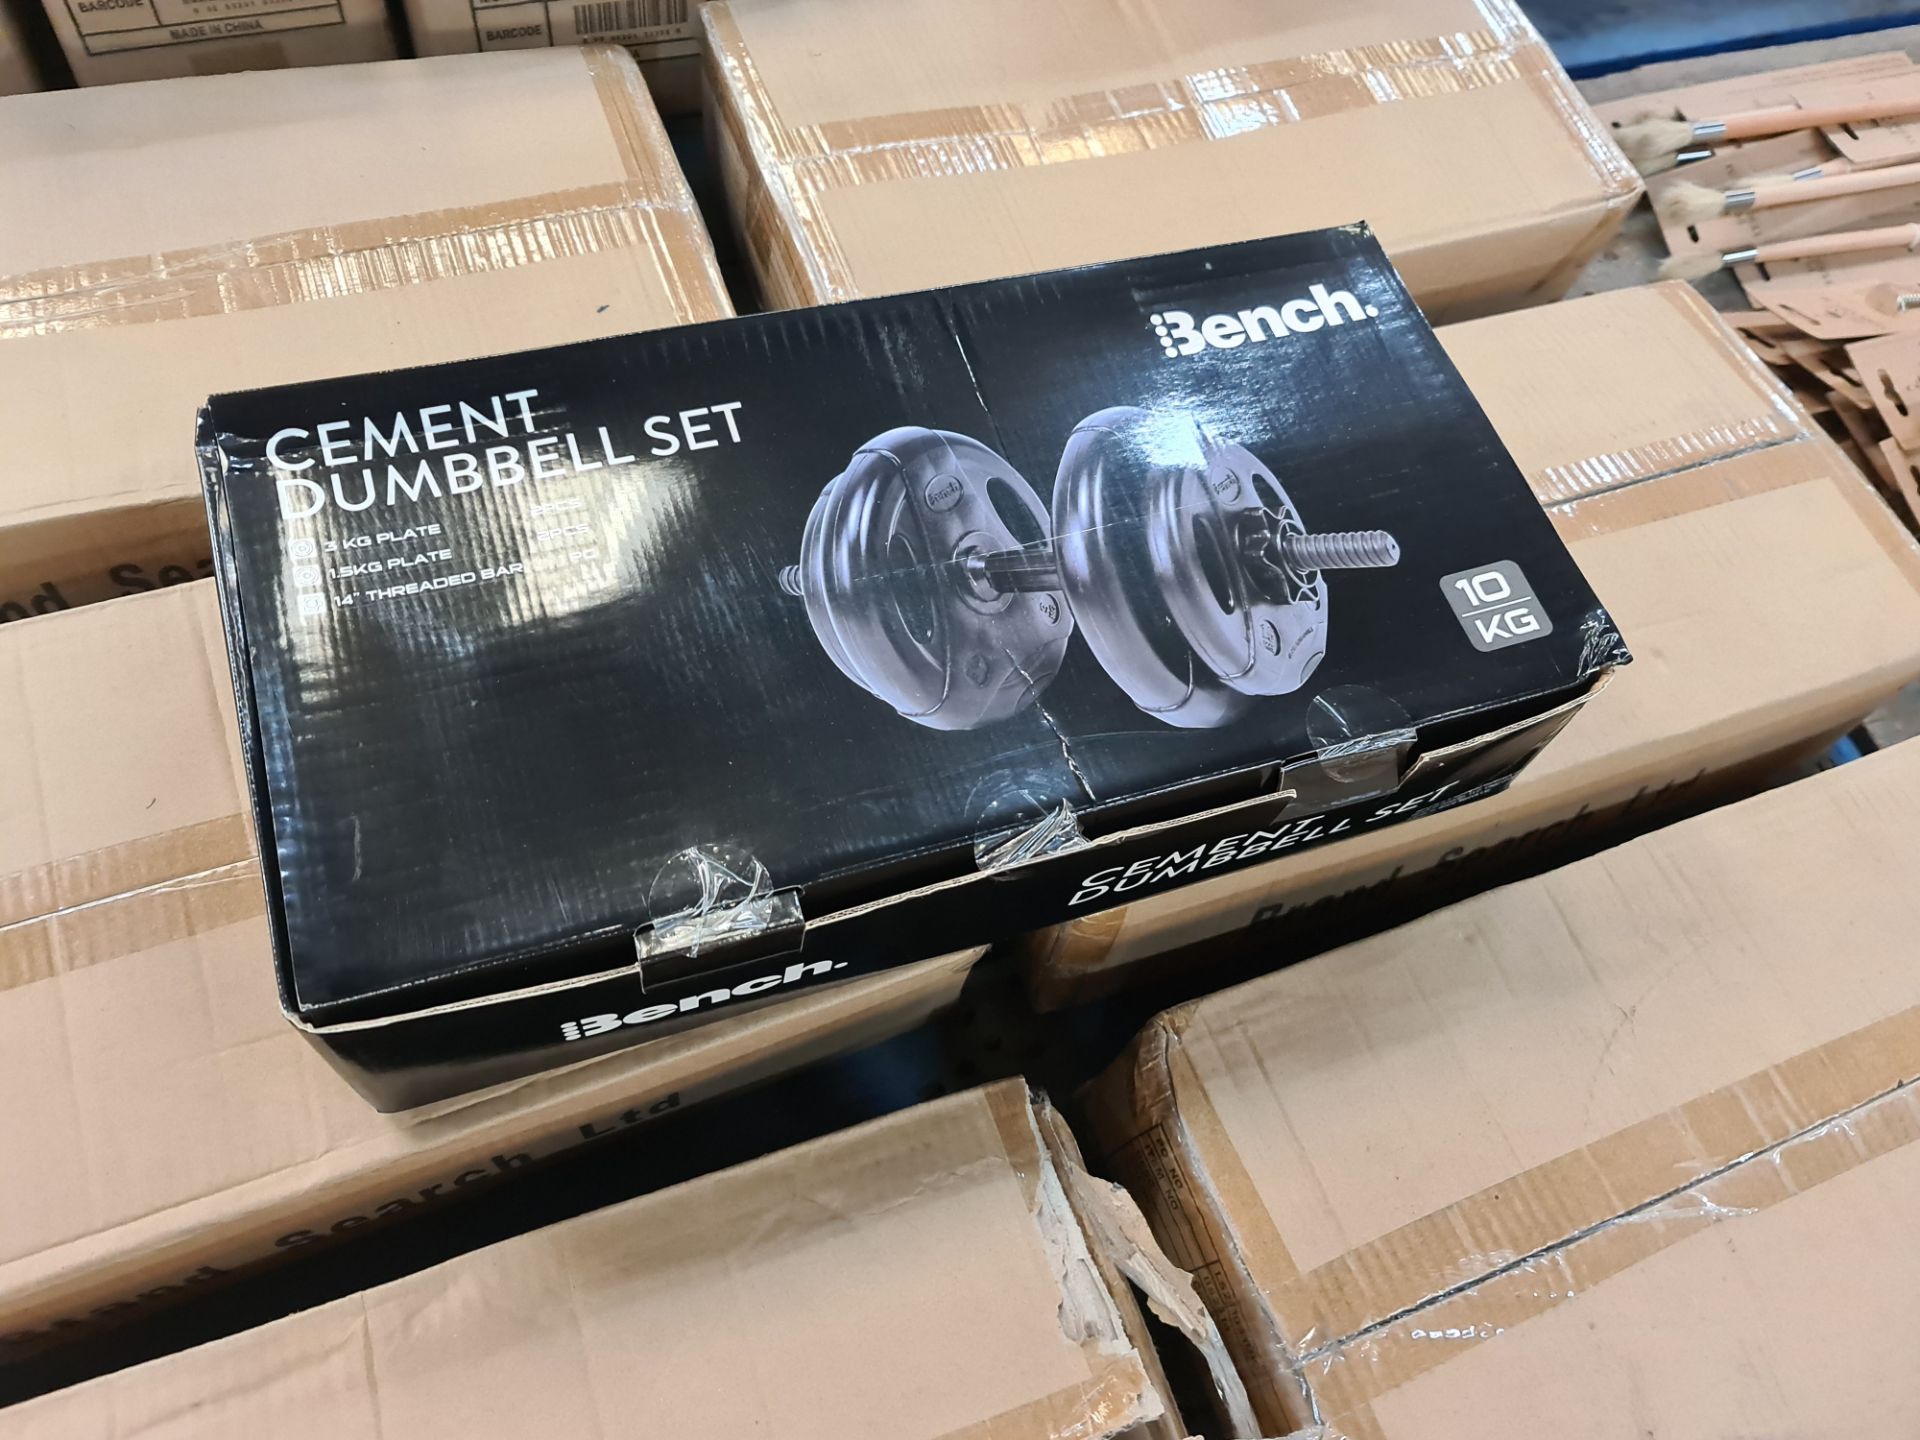 Pair of Bench Cement dumbbell sets. Each set is individually boxed and comprises 1 off 14" threaded